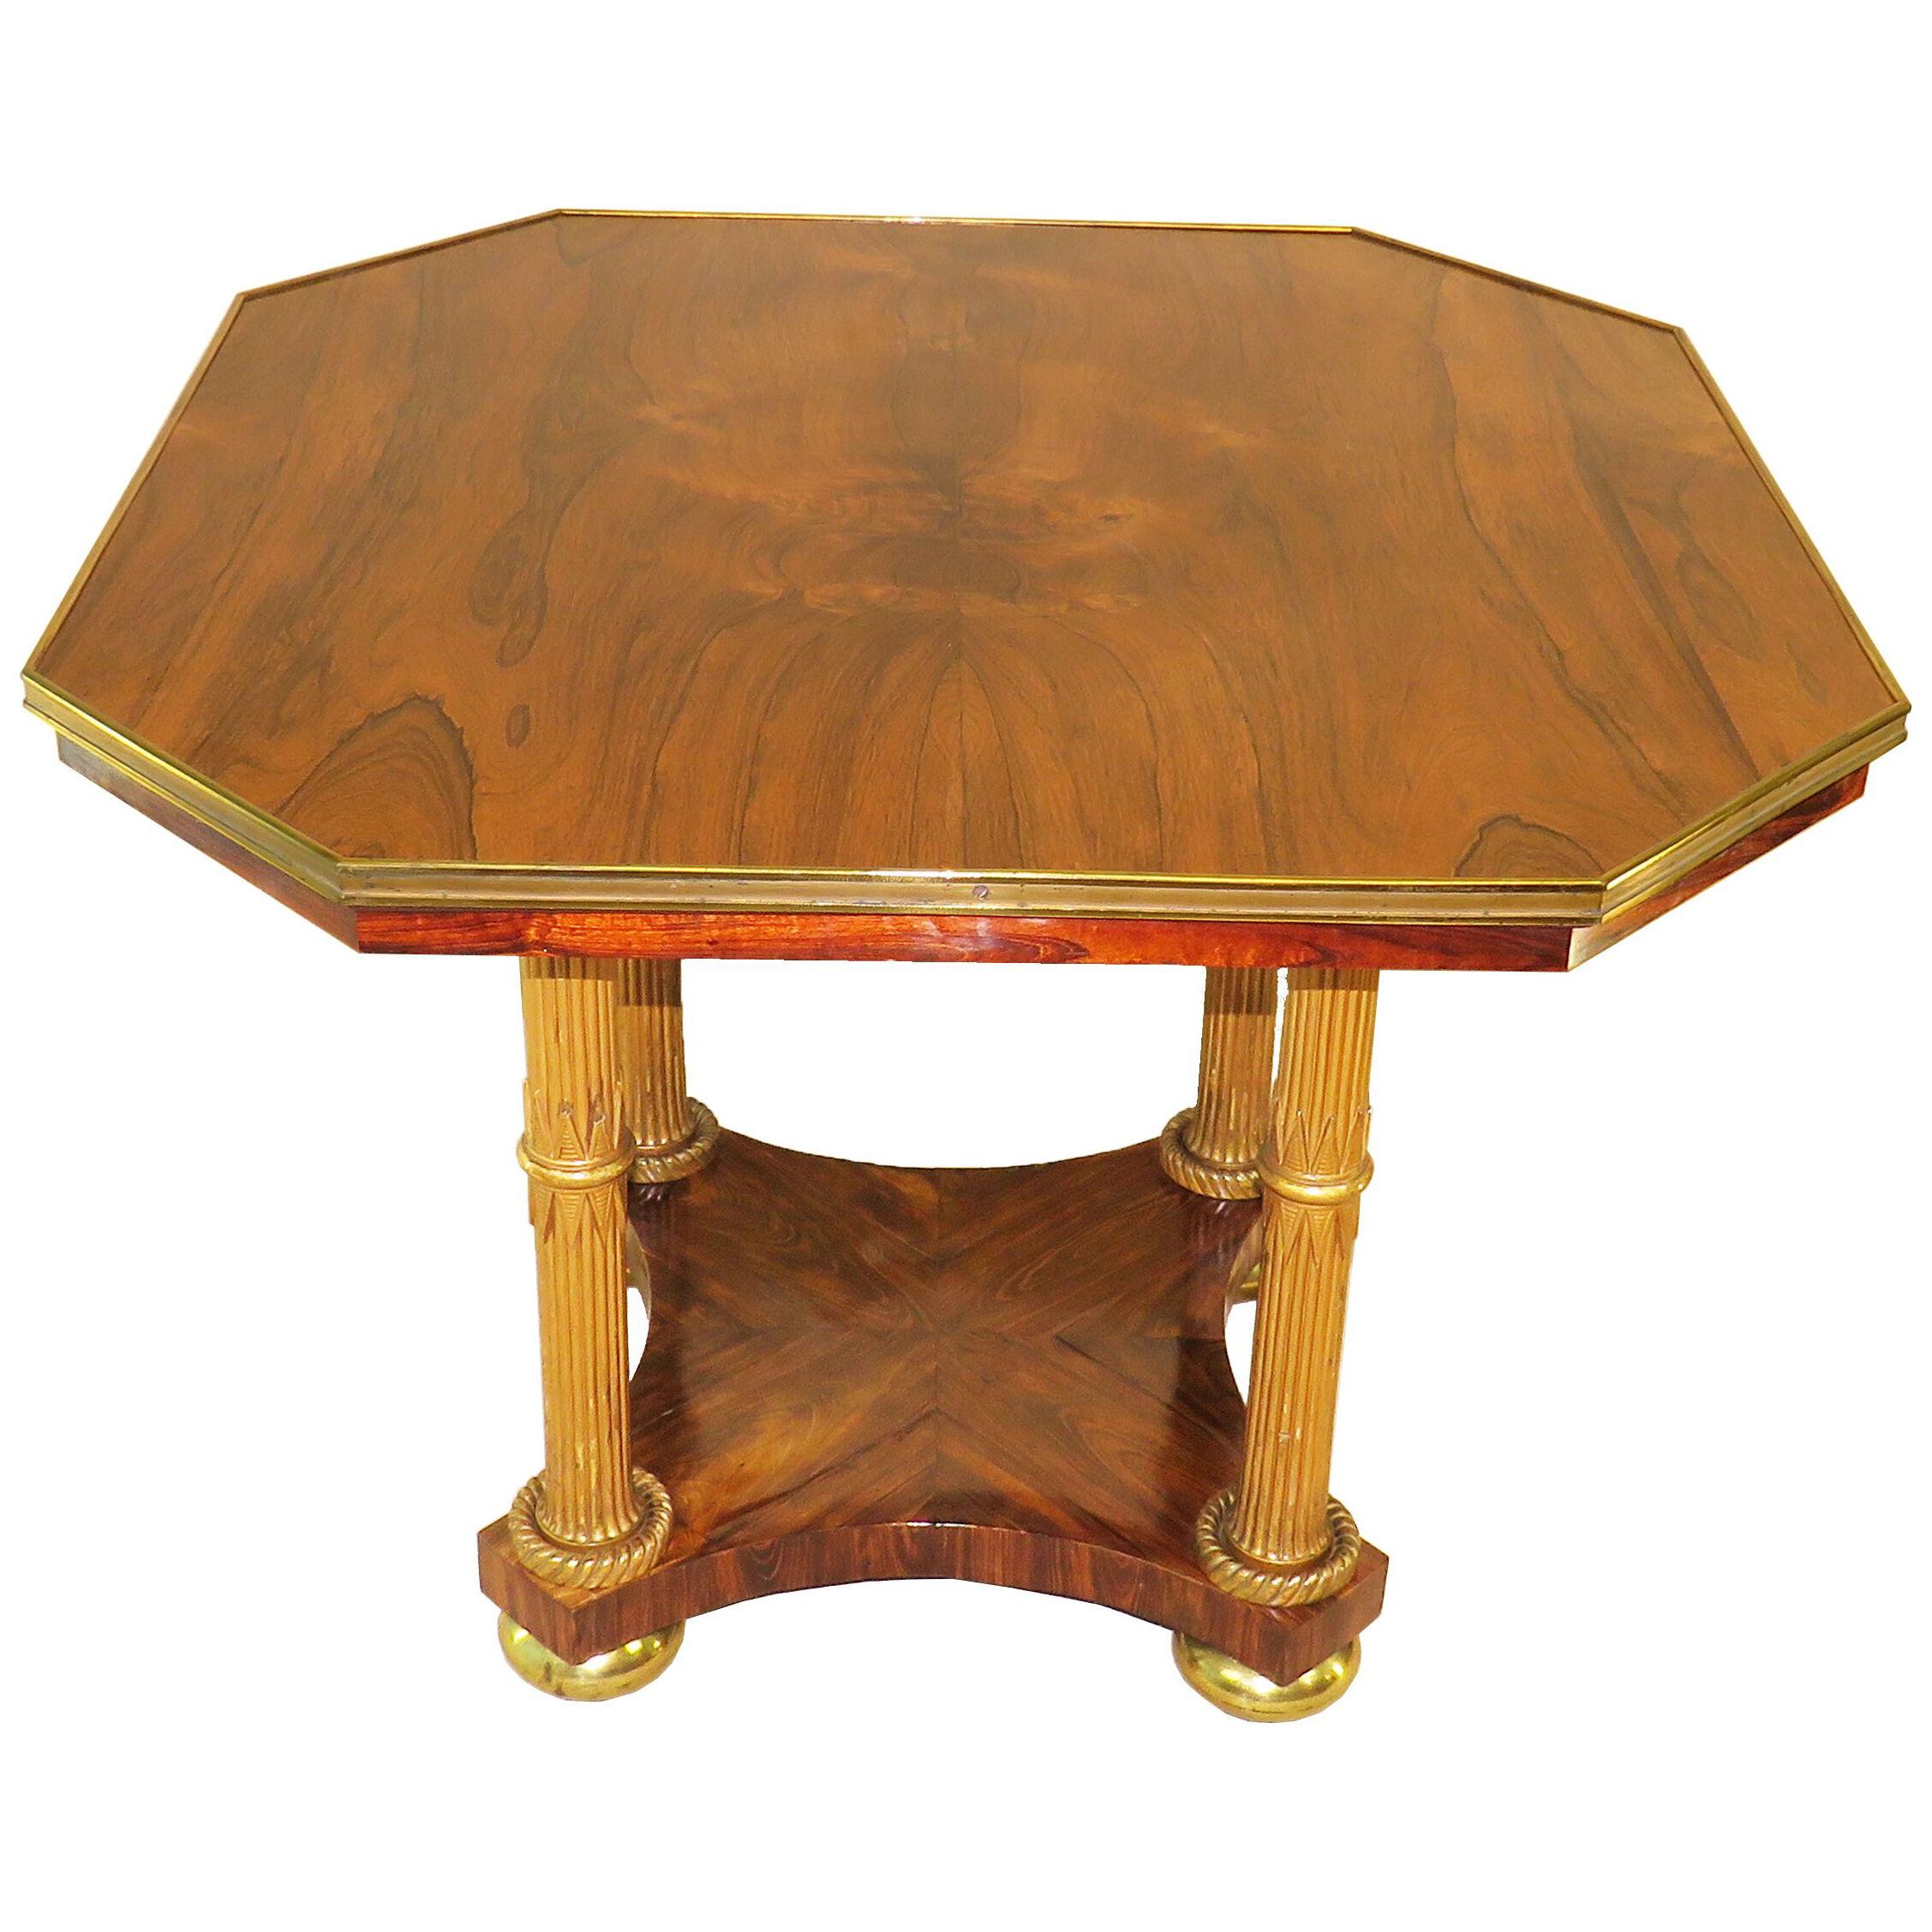 Regency English Rosewood, Parcel Gilt and Brass Centre Table